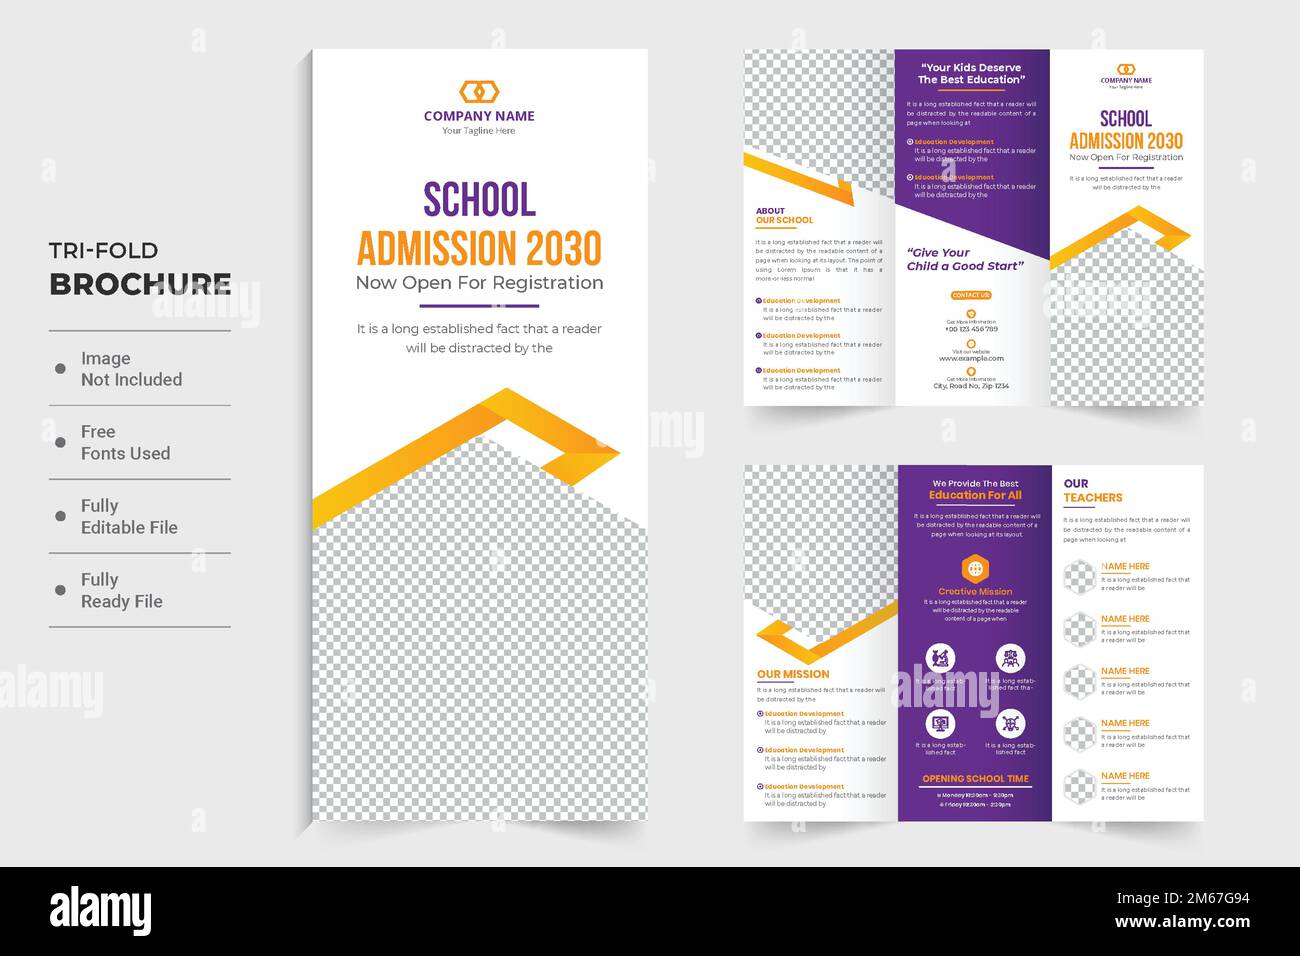 Academic education promotional brochure template for school or university. Back to school trifold brochure design with yellow and purple colors. Schoo Stock Vector